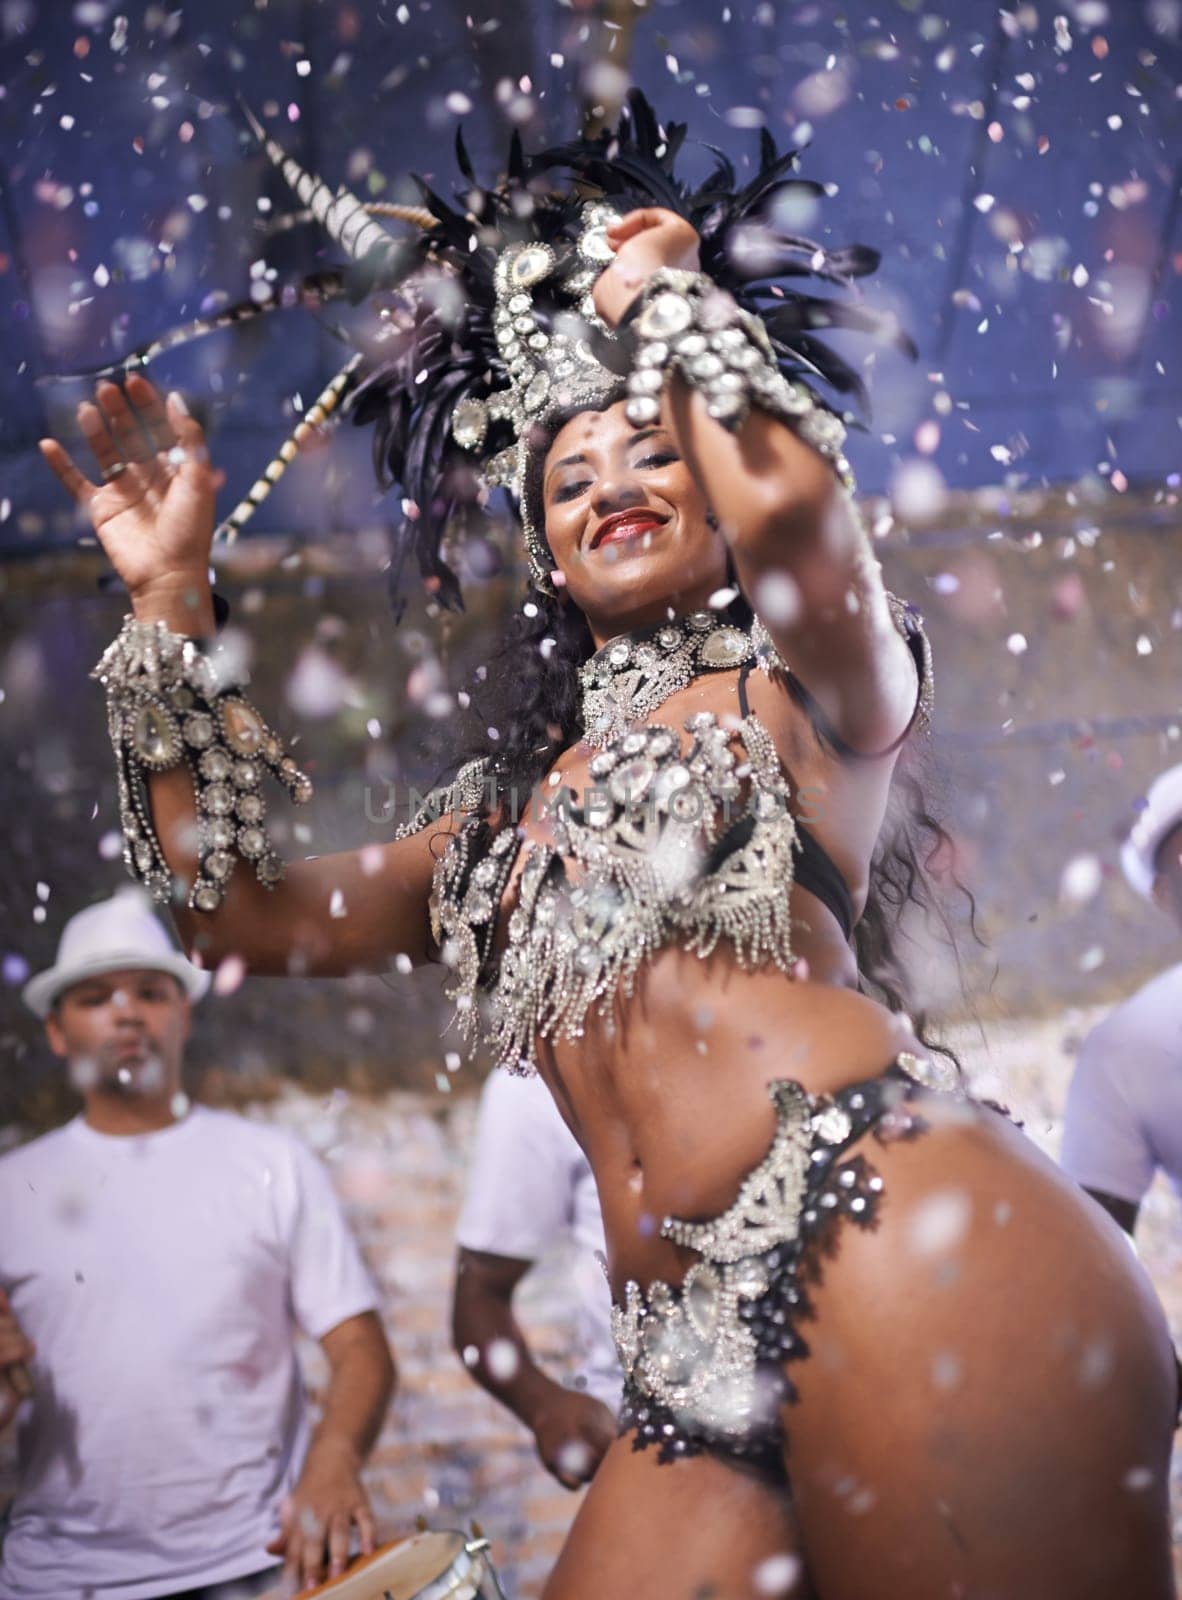 Dance, performance and woman samba at carnival, festival and event in Brazil for summer celebration of culture. Happy, dancer and creative fashion for salsa, party and night with confetti and music.